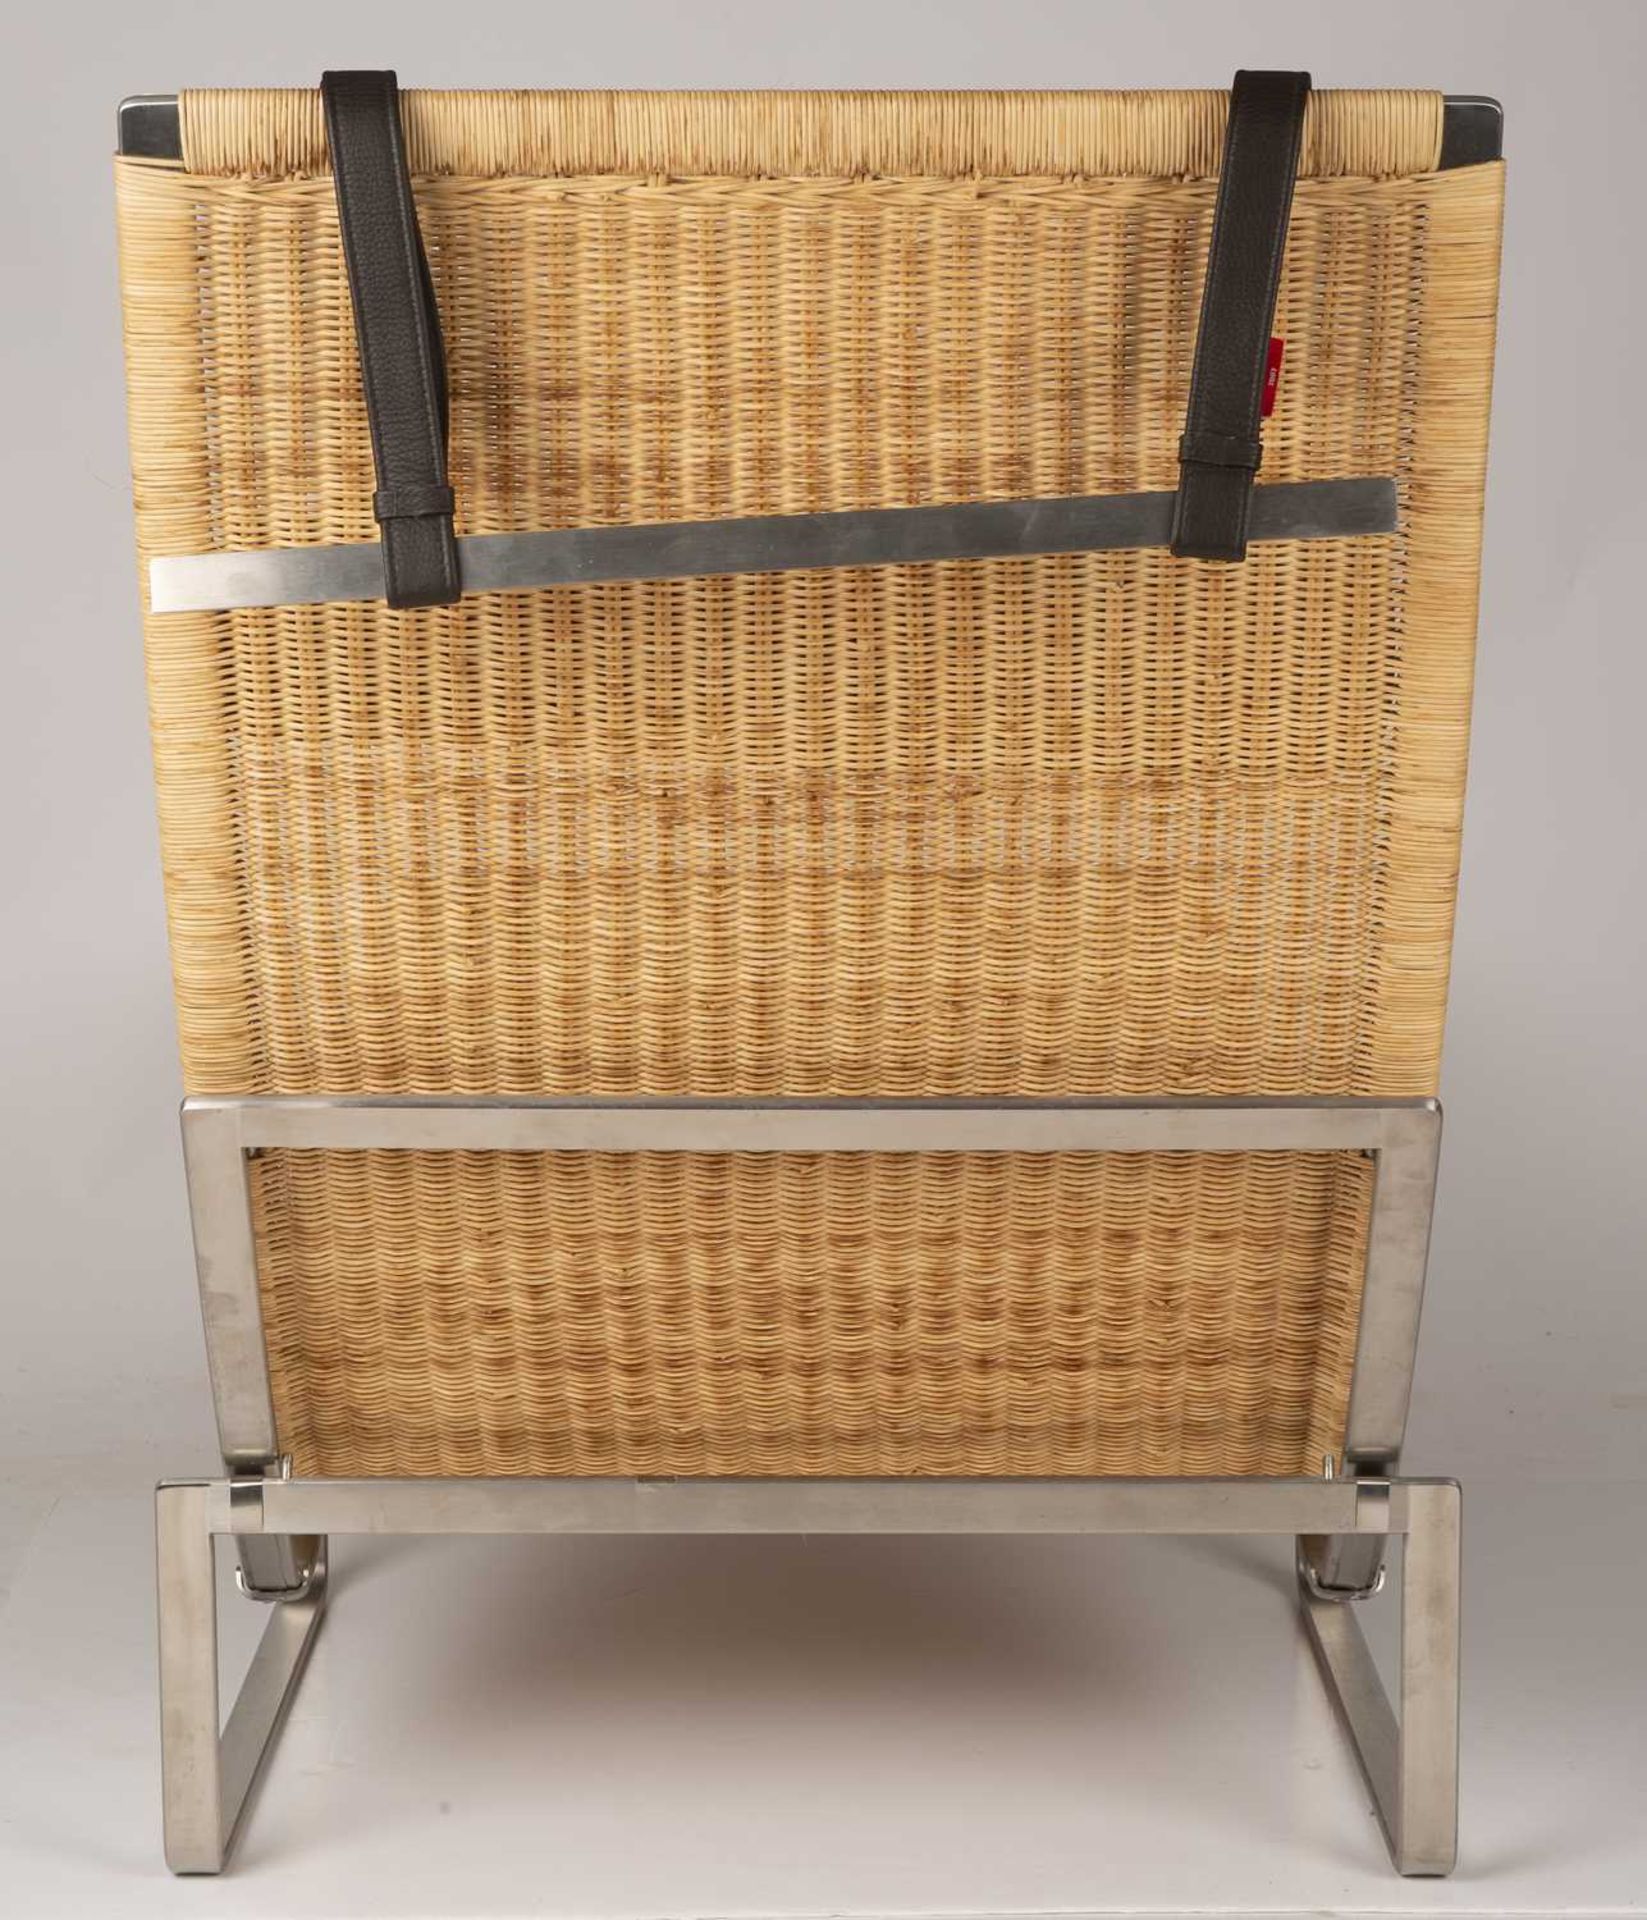 Poul Kjaerholm (1929-1980) for Fritz Hansen PK24 lounge chair the wicker seat with metal frame and - Image 3 of 4